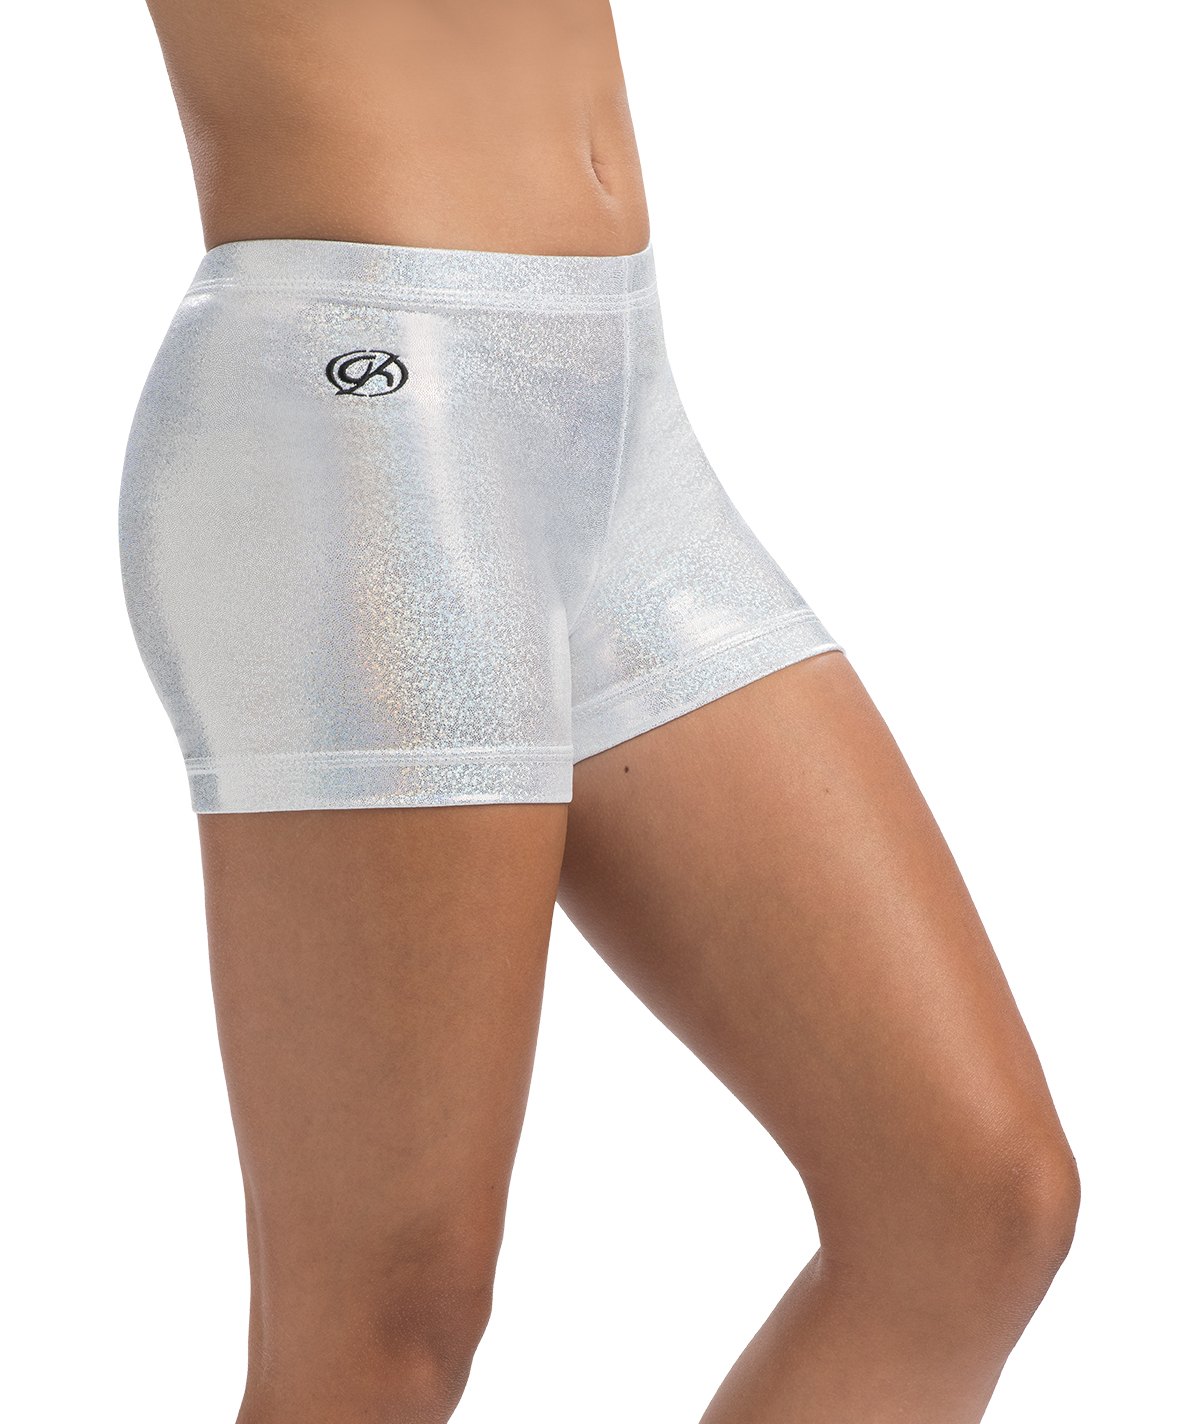 GK All Star Low Rise Sparkle Cheer Short